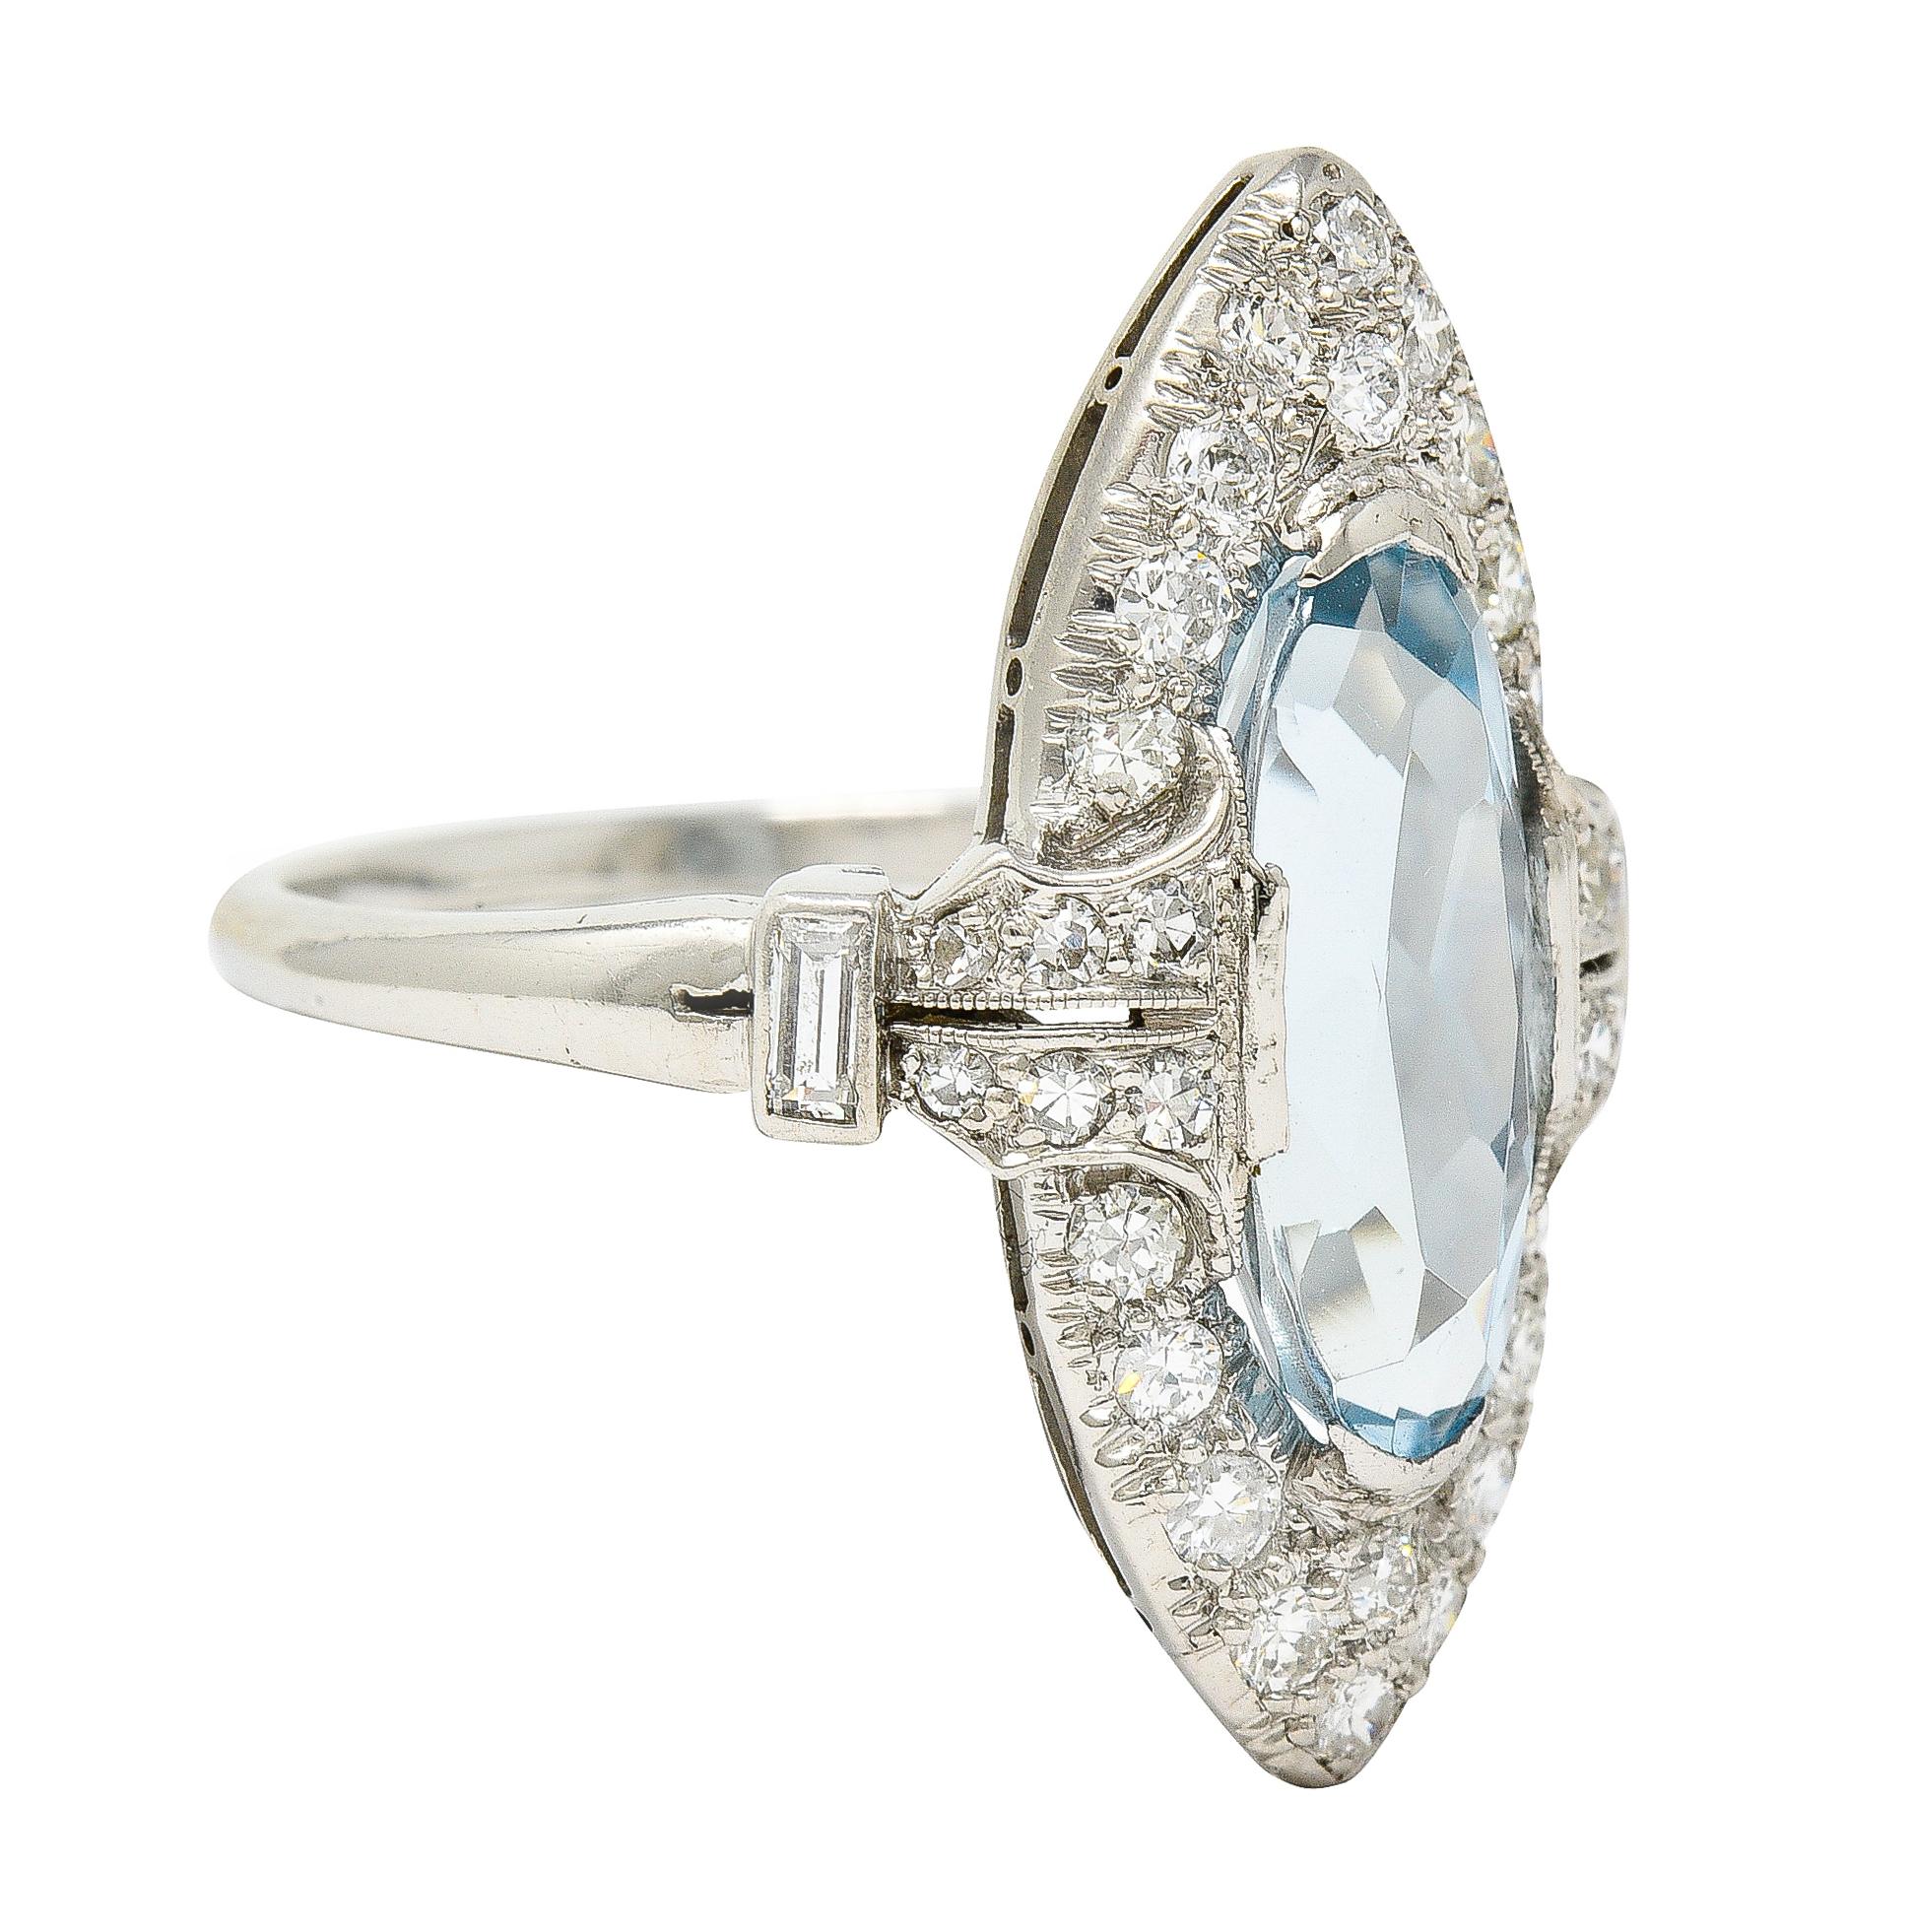 Centering a navette cut aquamarine weighing approximately 3.26 carats - transparent light blue in color 
Set with tab prongs with a surround of bead set clustered old European cut diamonds 
With additional old European and baguette-cut diamonds